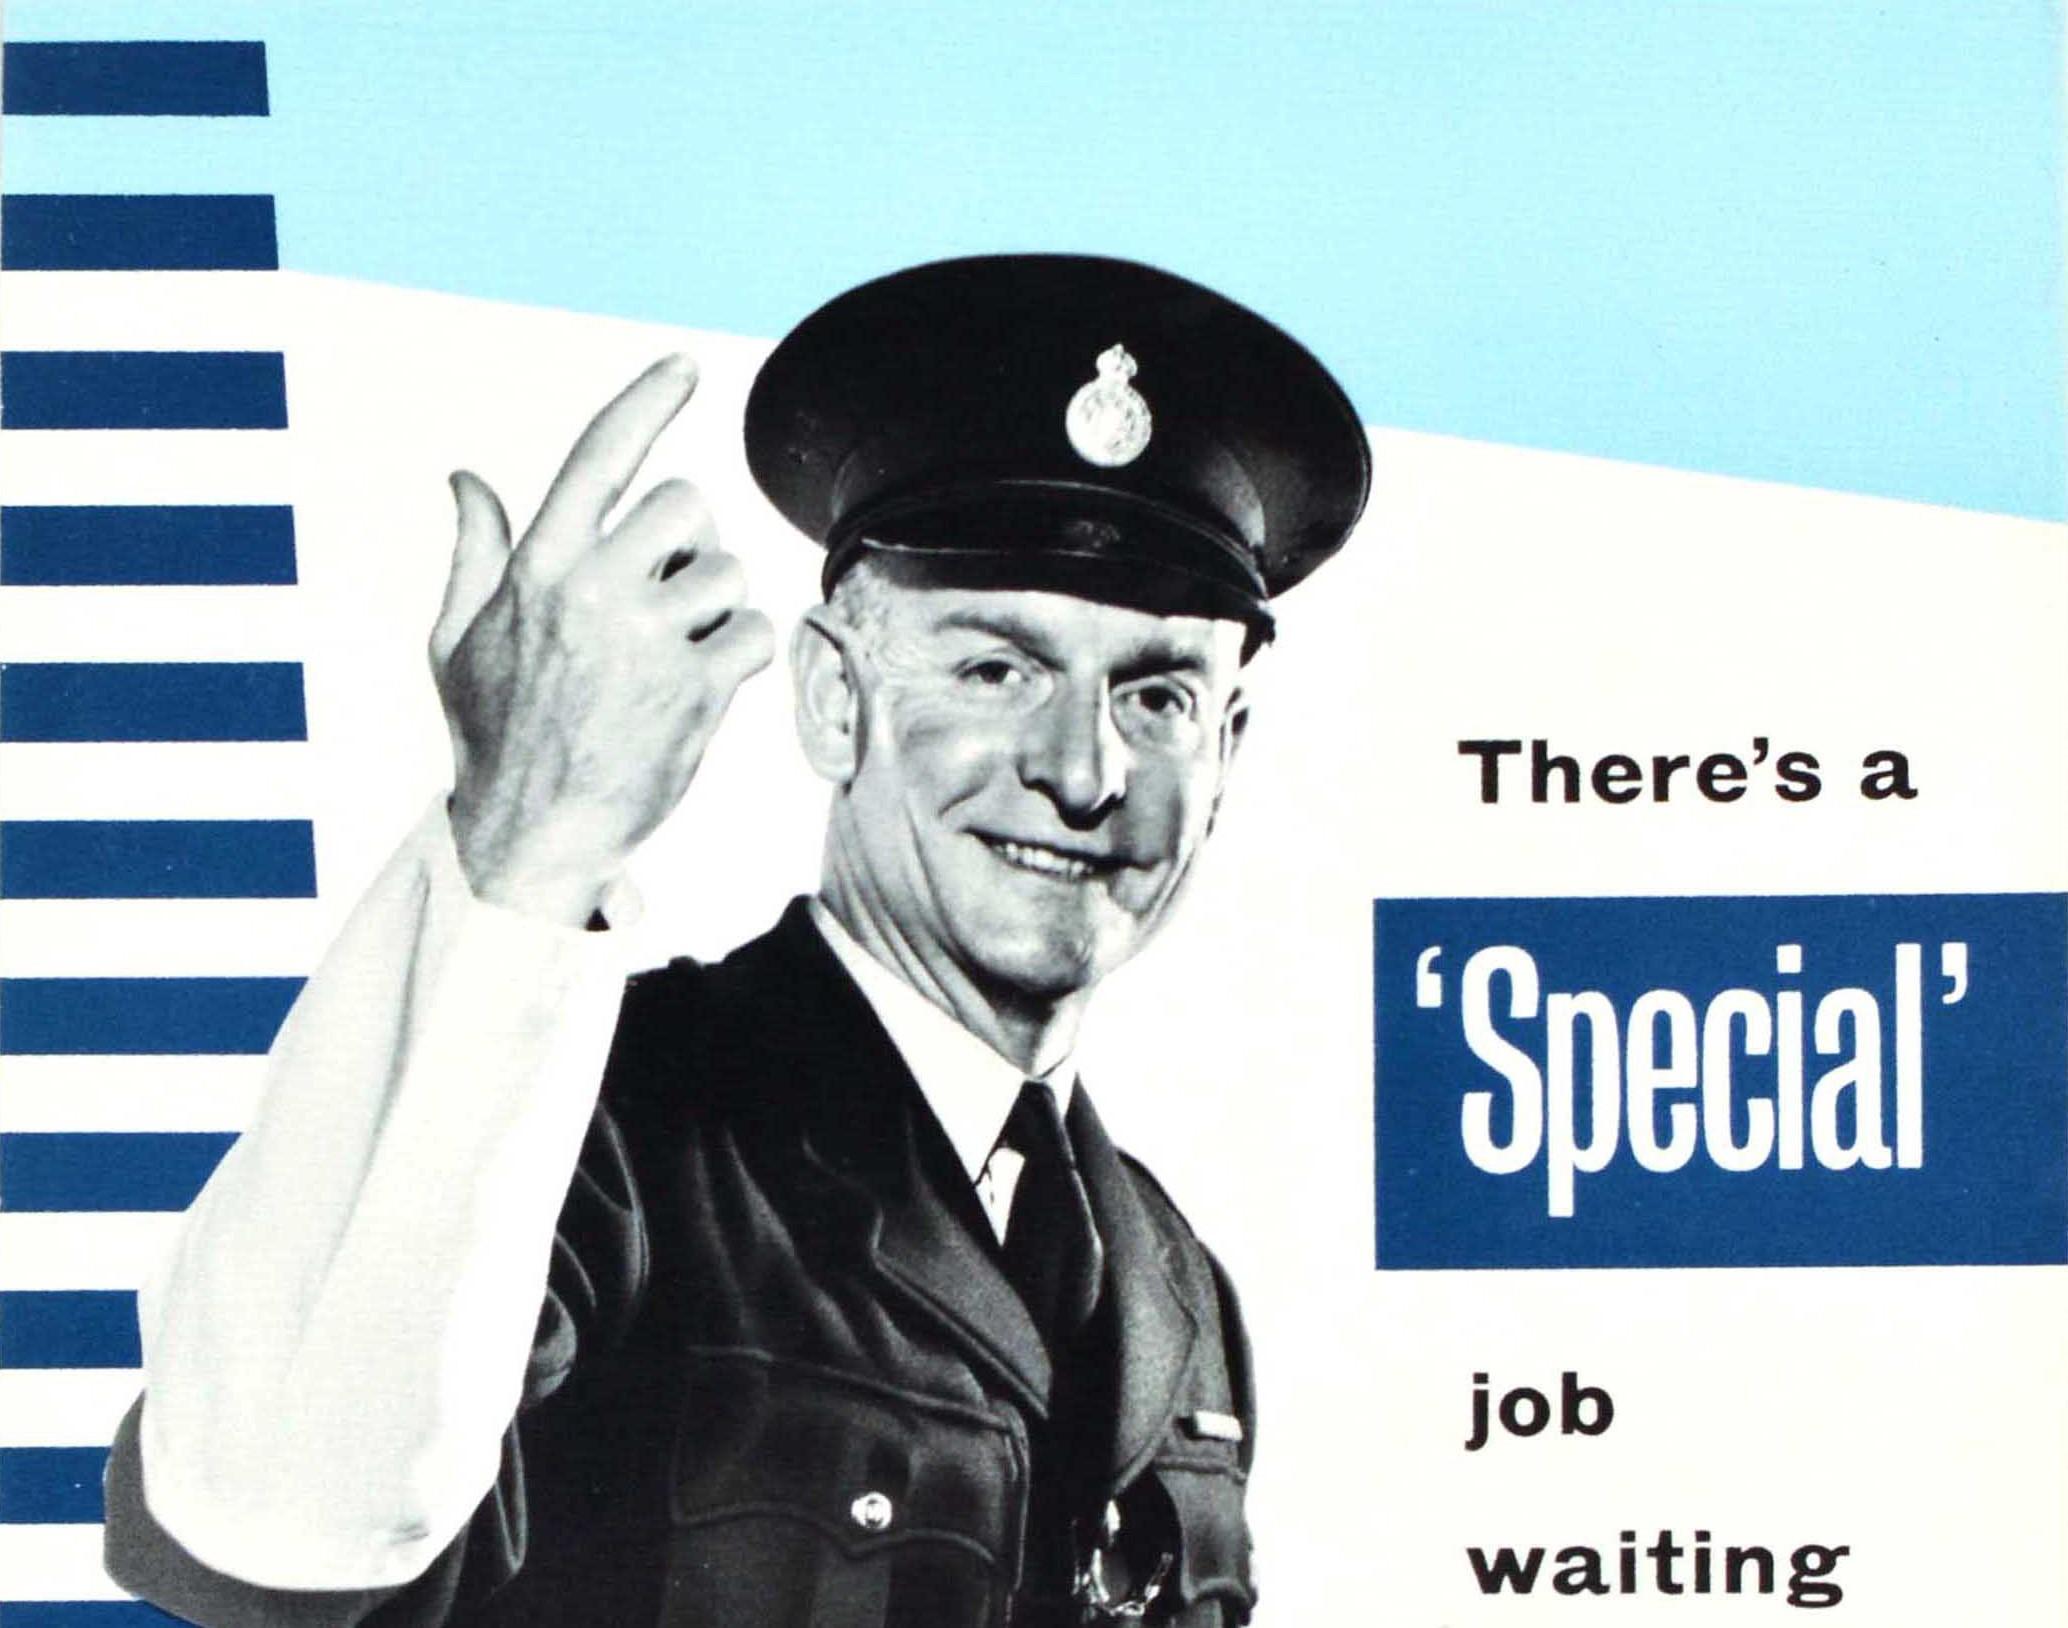 Original vintage recruitment poster - There's a 'Special' job waiting for you Join your local Special Constabulary - featuring a smiling man in traffic police uniform directing the viewer to the bold text on the side. Special Constables are part